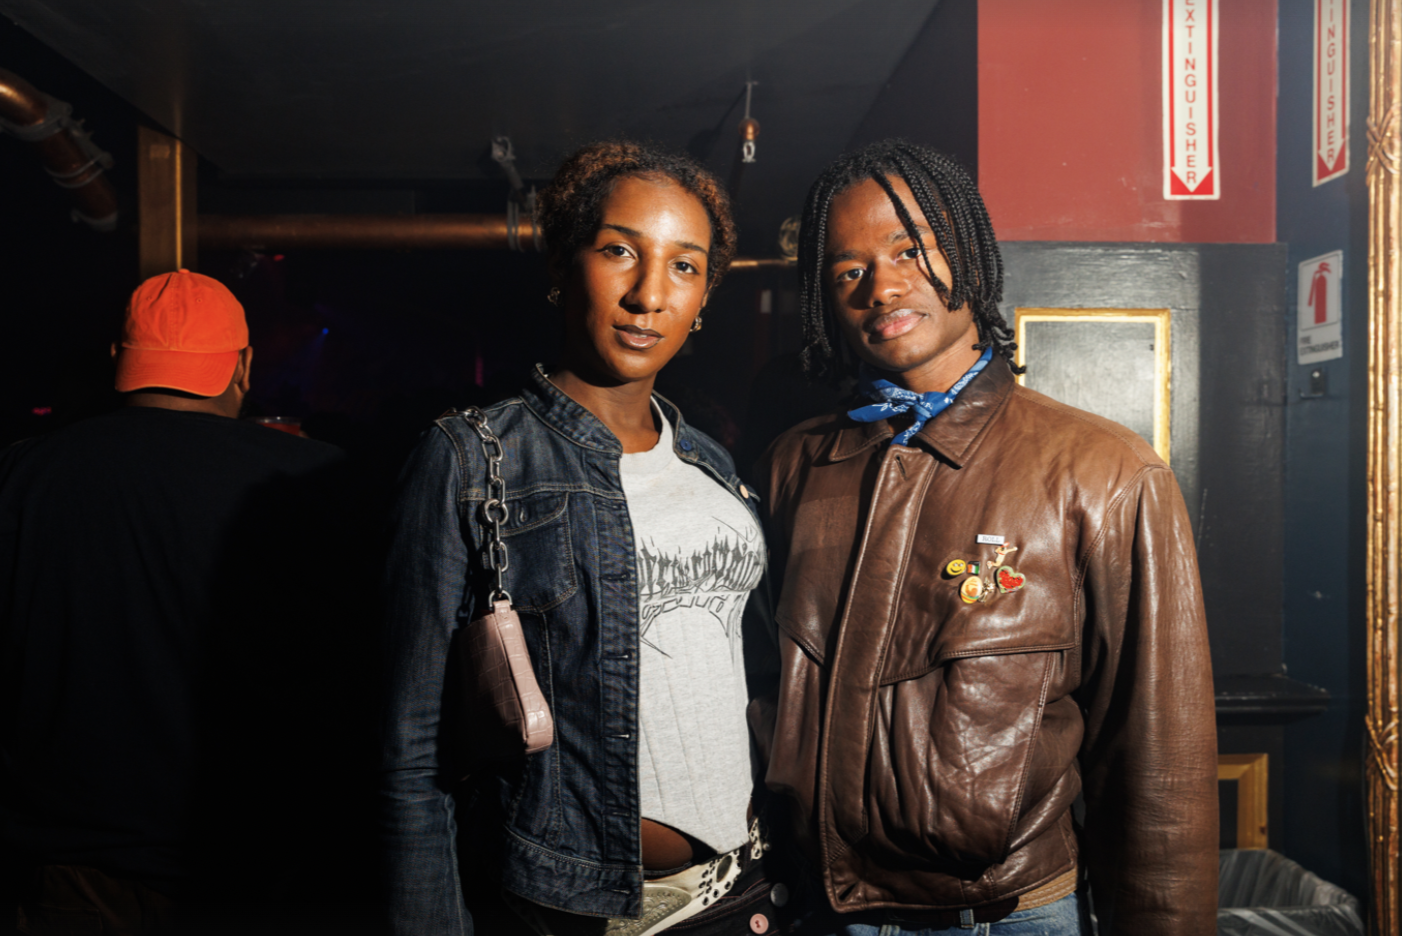 Two young people of color stand side by side inside a nightclub with thoughtful expressions on their faces.